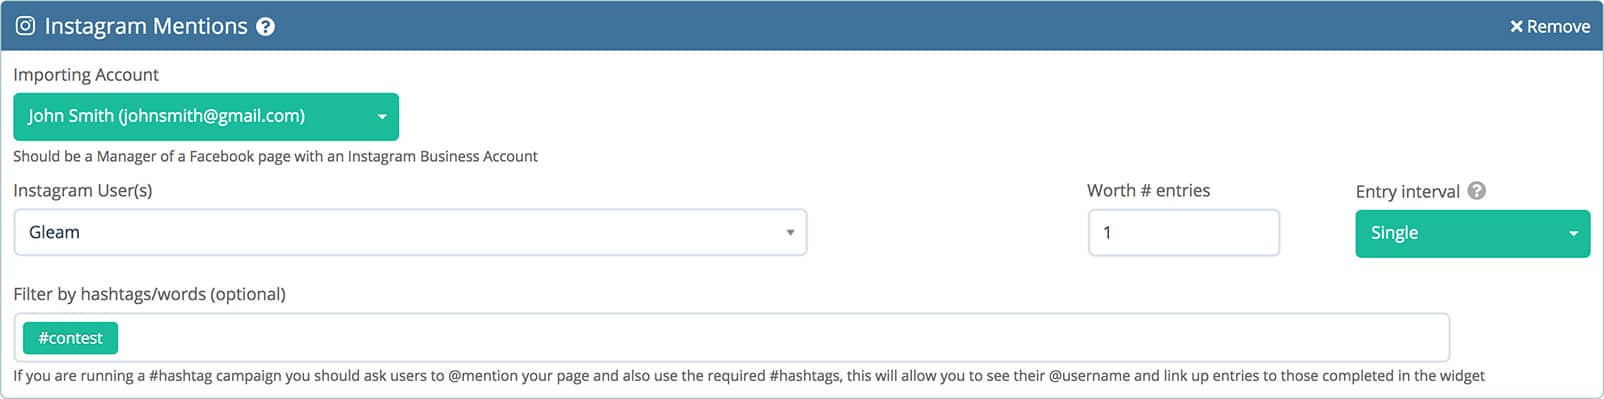 Filter your Instagram @mention imports through hashtag or word filters